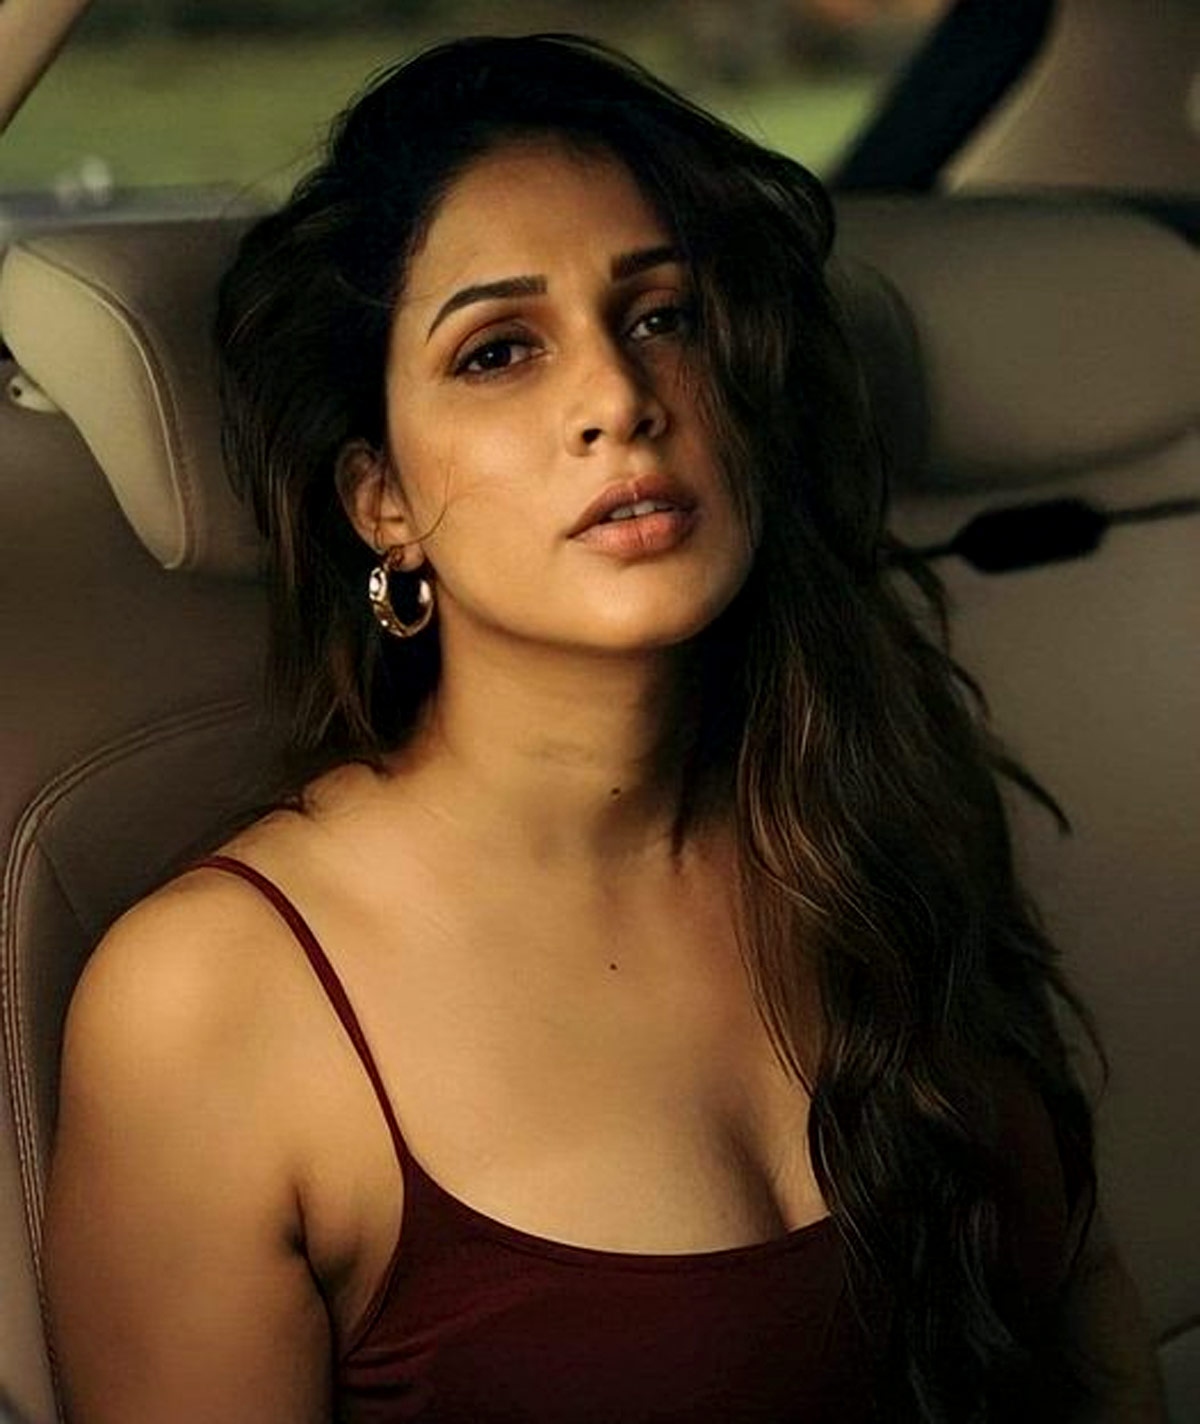 Angry Lavanya Tripathi asks troll to get his language right